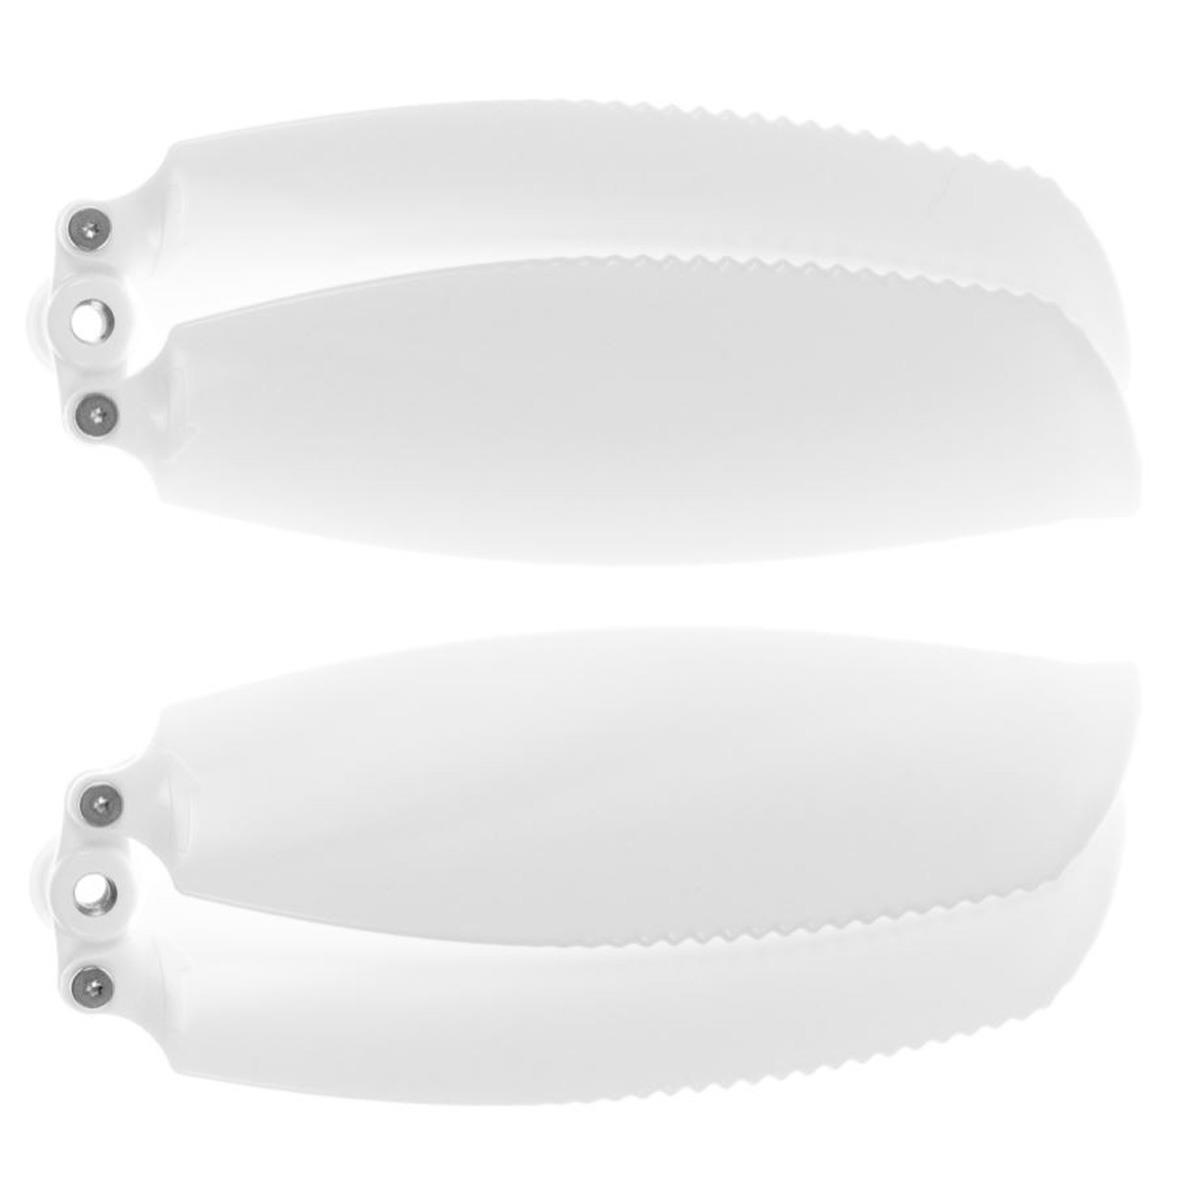 Image of Parrot Propeller Blades for ANAFI Ai Drone